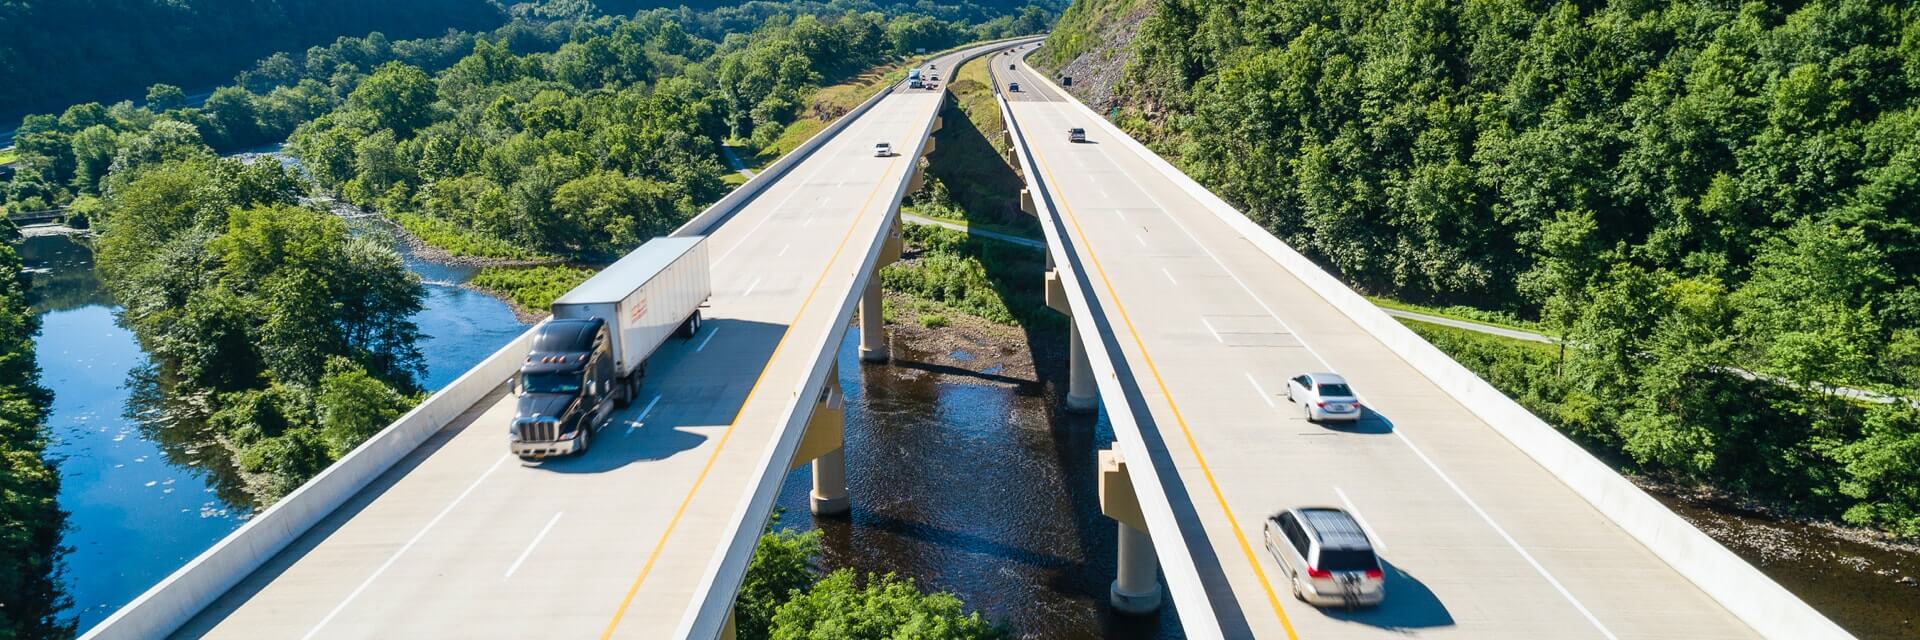 Cars and trucks on highway overpass over river